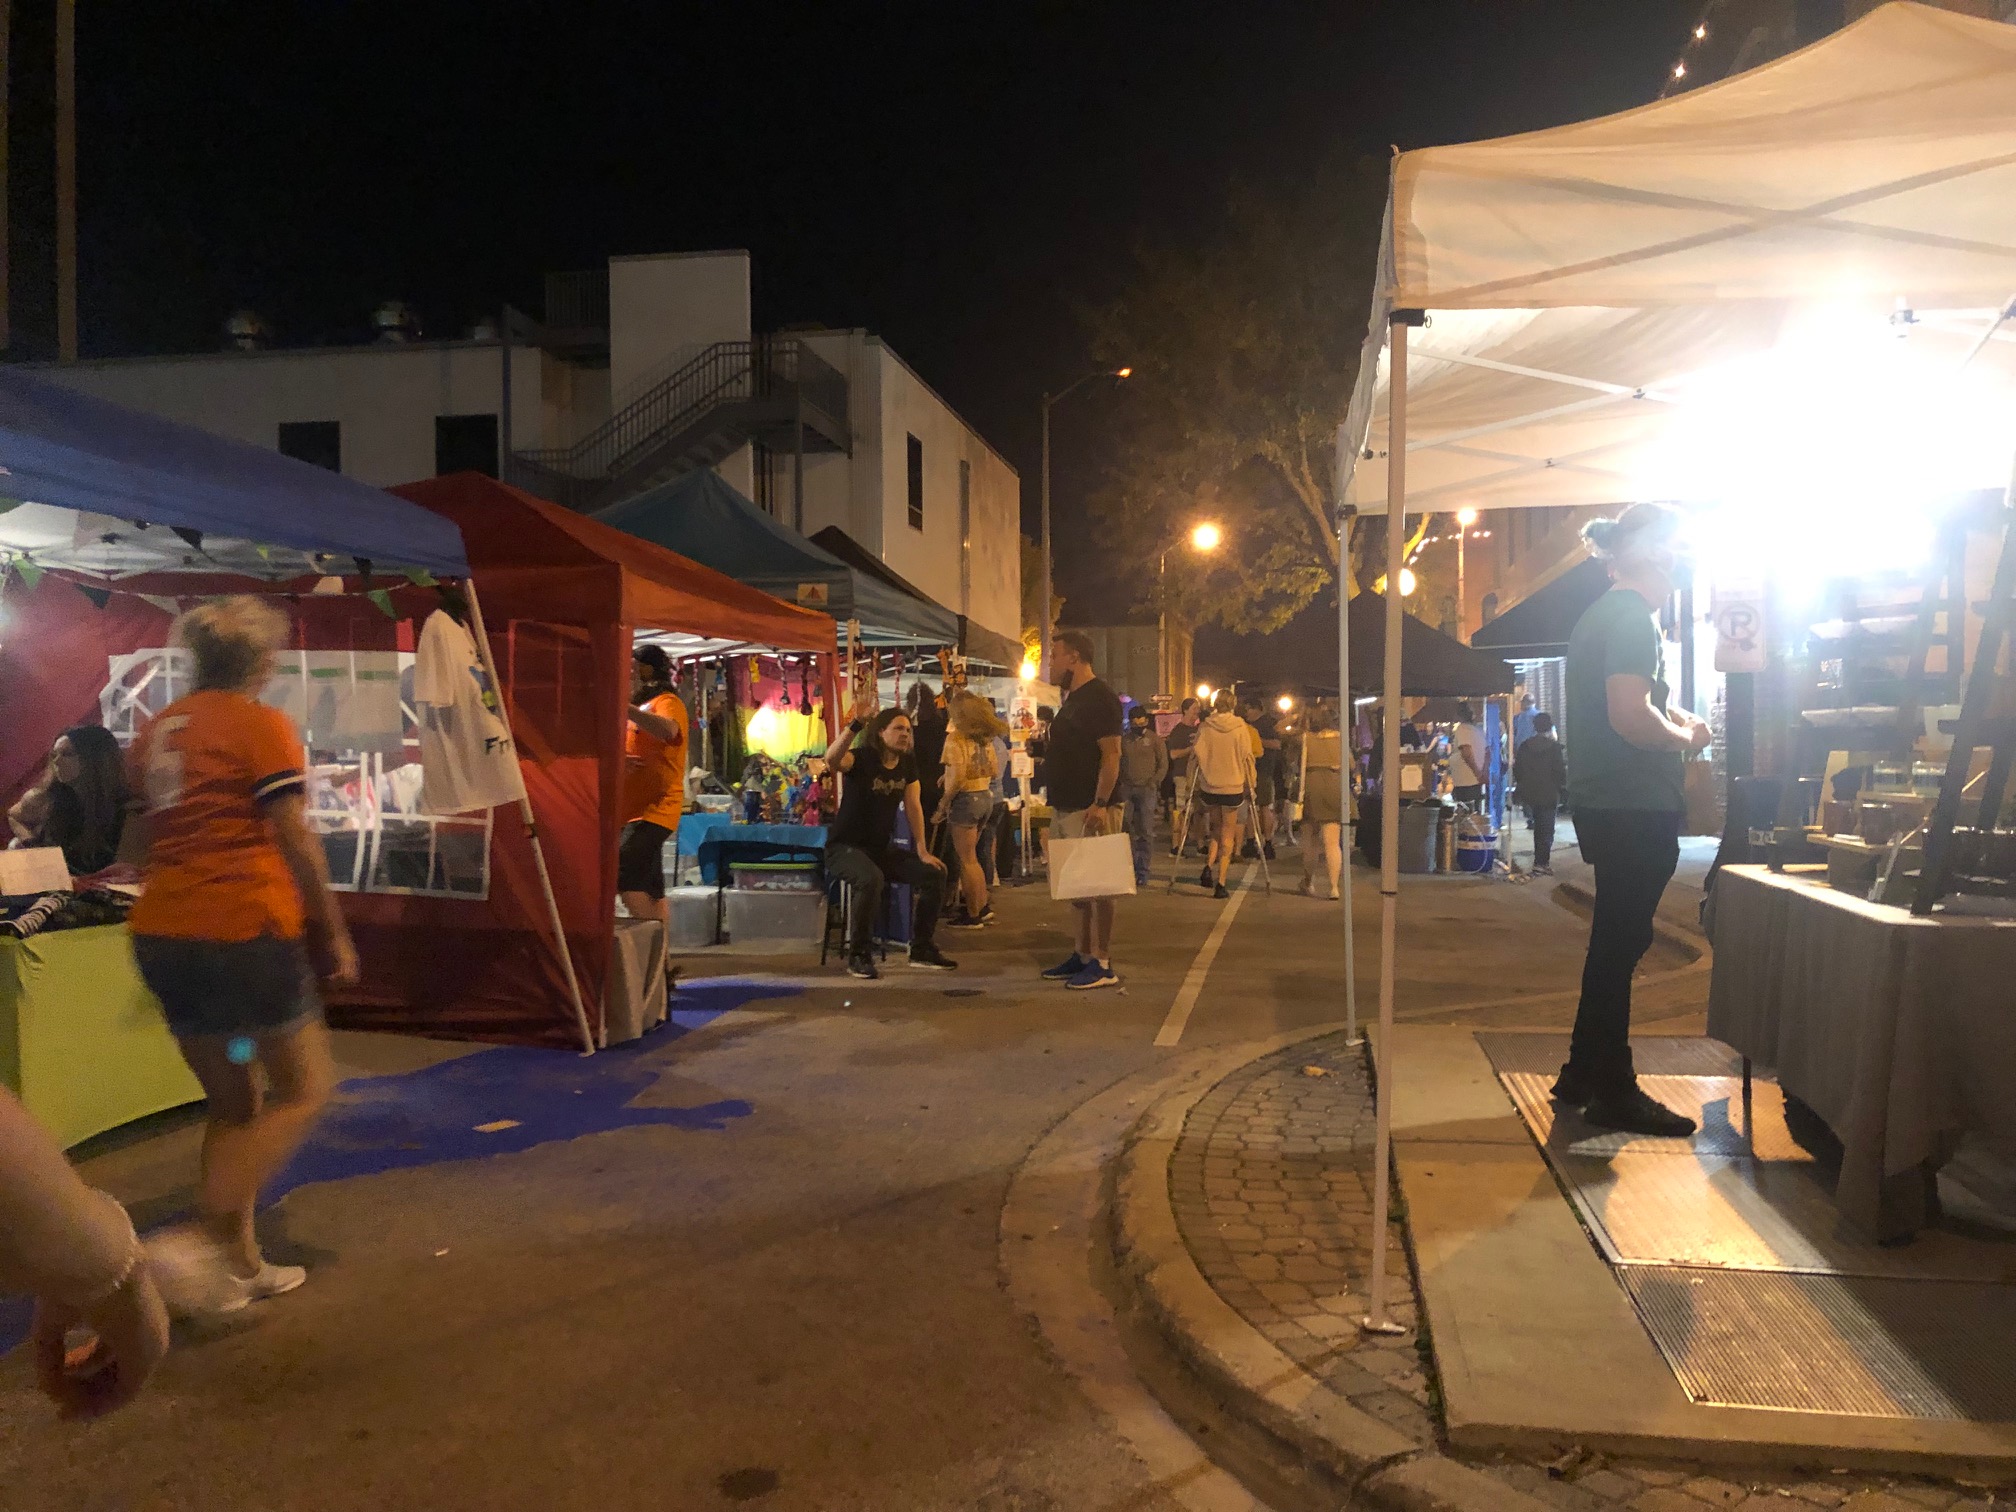 At night, there are vendor tents for Toast to Taylor Street and shoppers browsing the open air market. Photo by Alyssa Buckley.